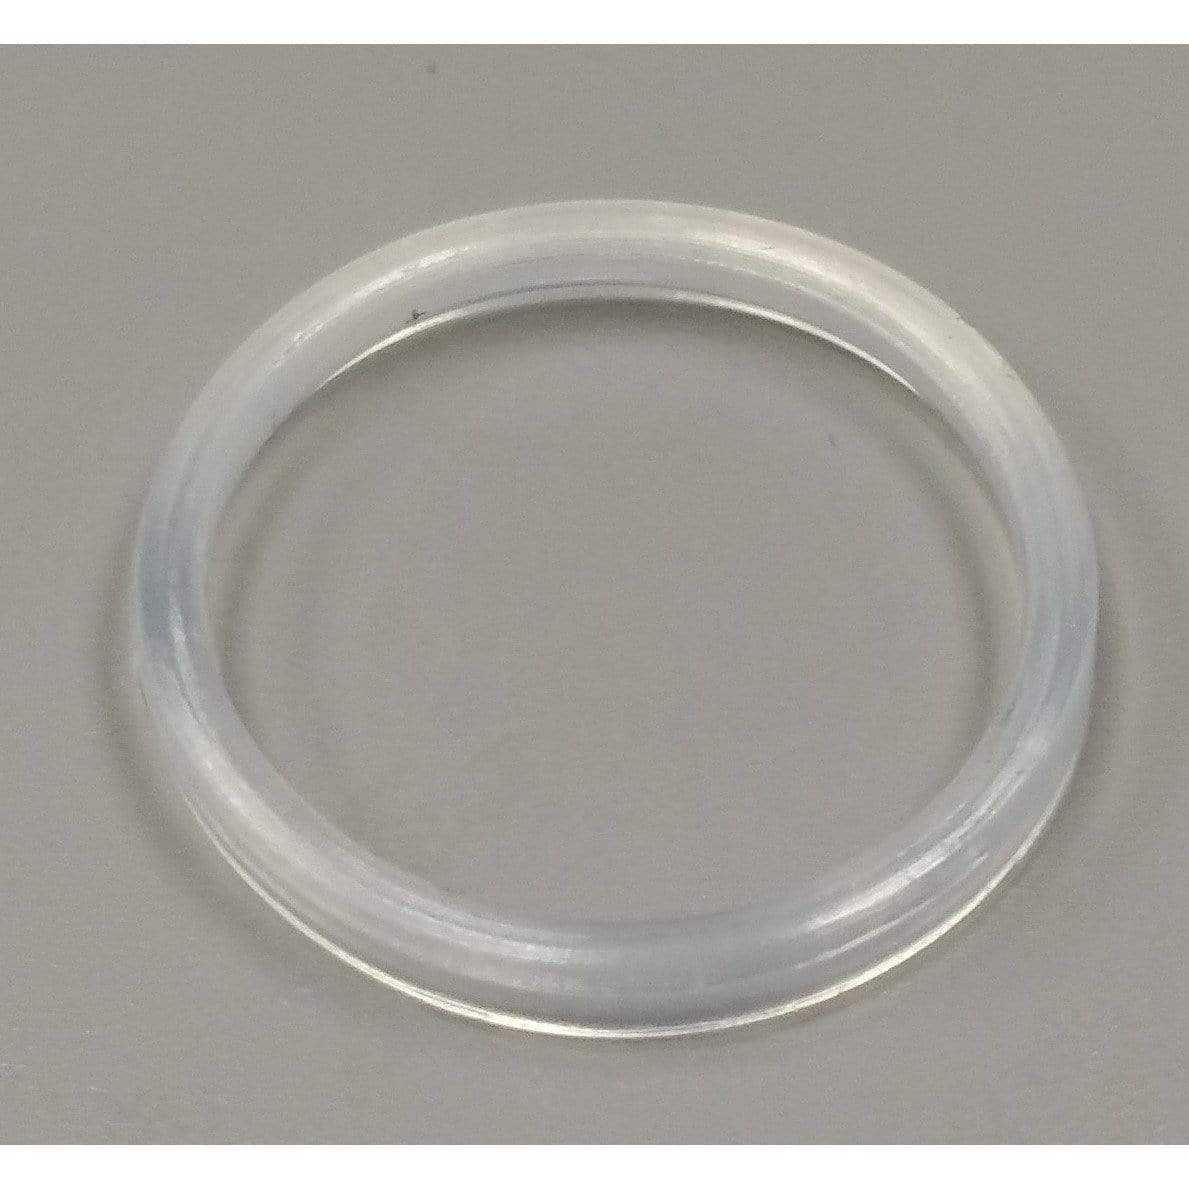 TFV4 Mini Replacement Seals Top Glass Clear Oring Seals/Oring's